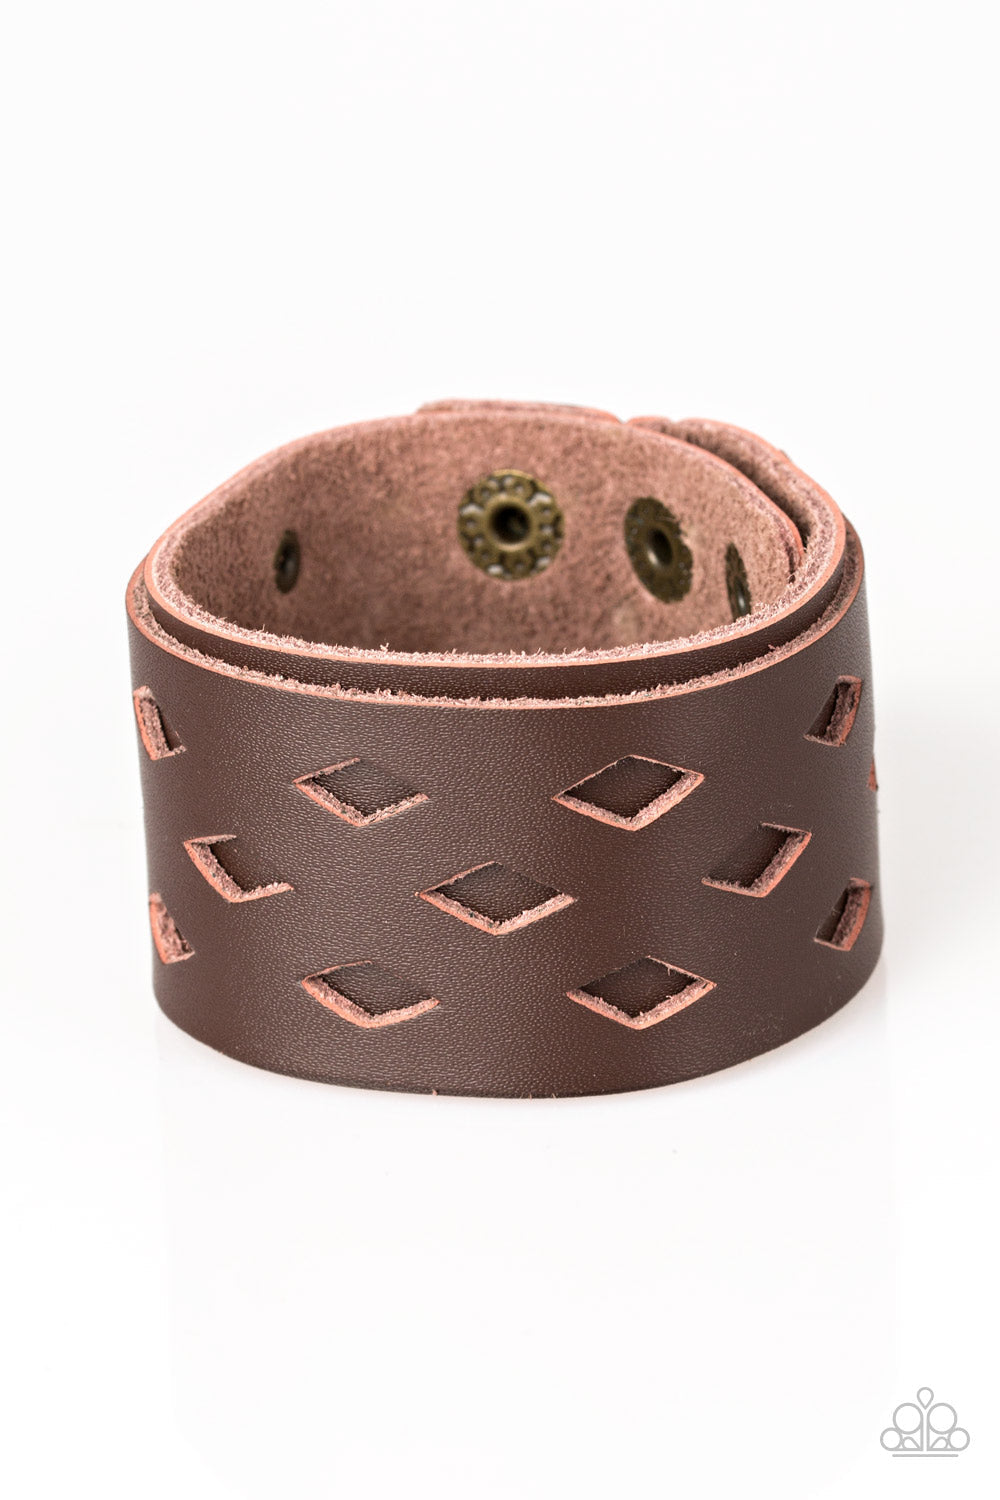 Bucking Bronco Brown - Men's Leather Bracelet - Paparazzi Accessories - Featuring airy diamond-shaped cutouts, a brown leather band is studded in place along a thicker brown leather band for a rustic look. Features an adjustable snap closure. Sold as one individual bracelet.